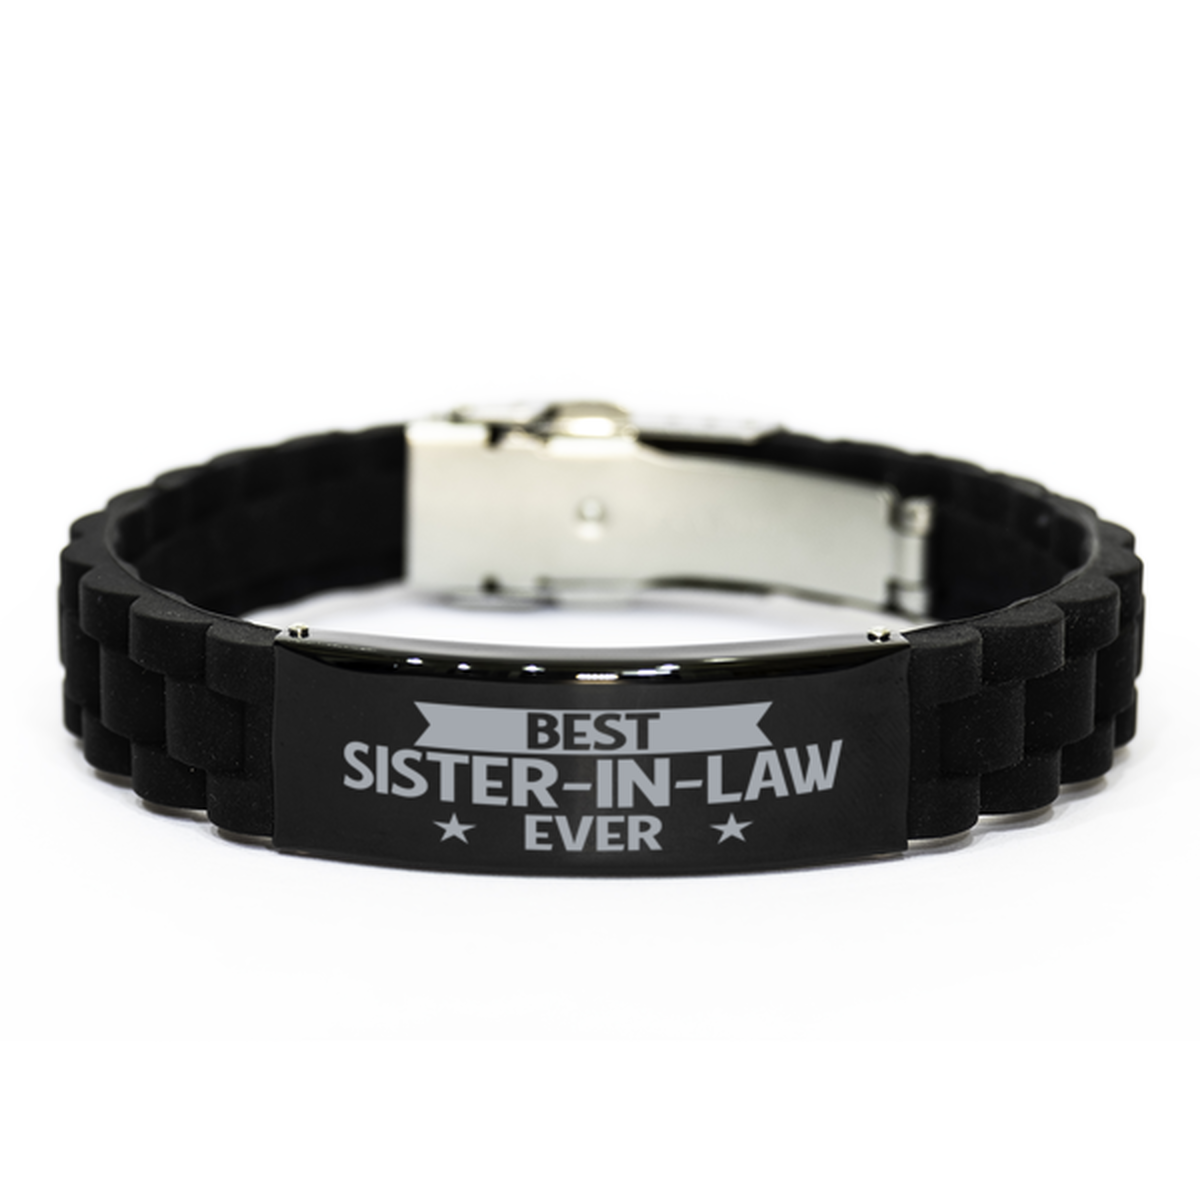 Best Sister-in-law Ever Sister-in-law Gifts, Funny Black Engraved Bracelet For Sister-in-law, Family Gifts For Women